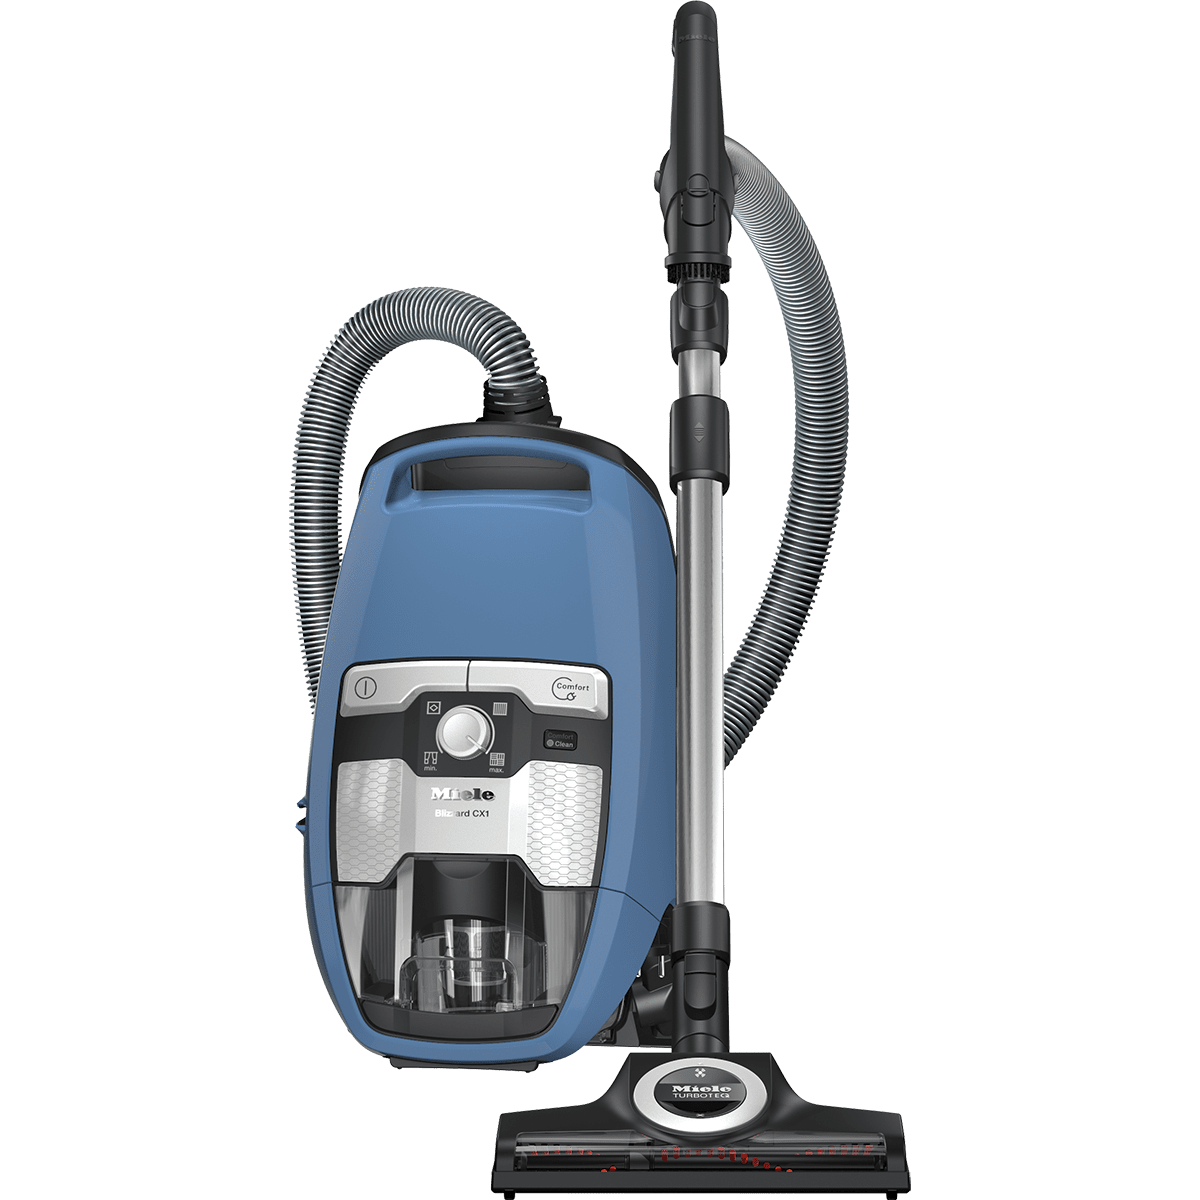 Miele Blizzard CX1 Turbo Team Bagless Canister Vacuum Cleaner